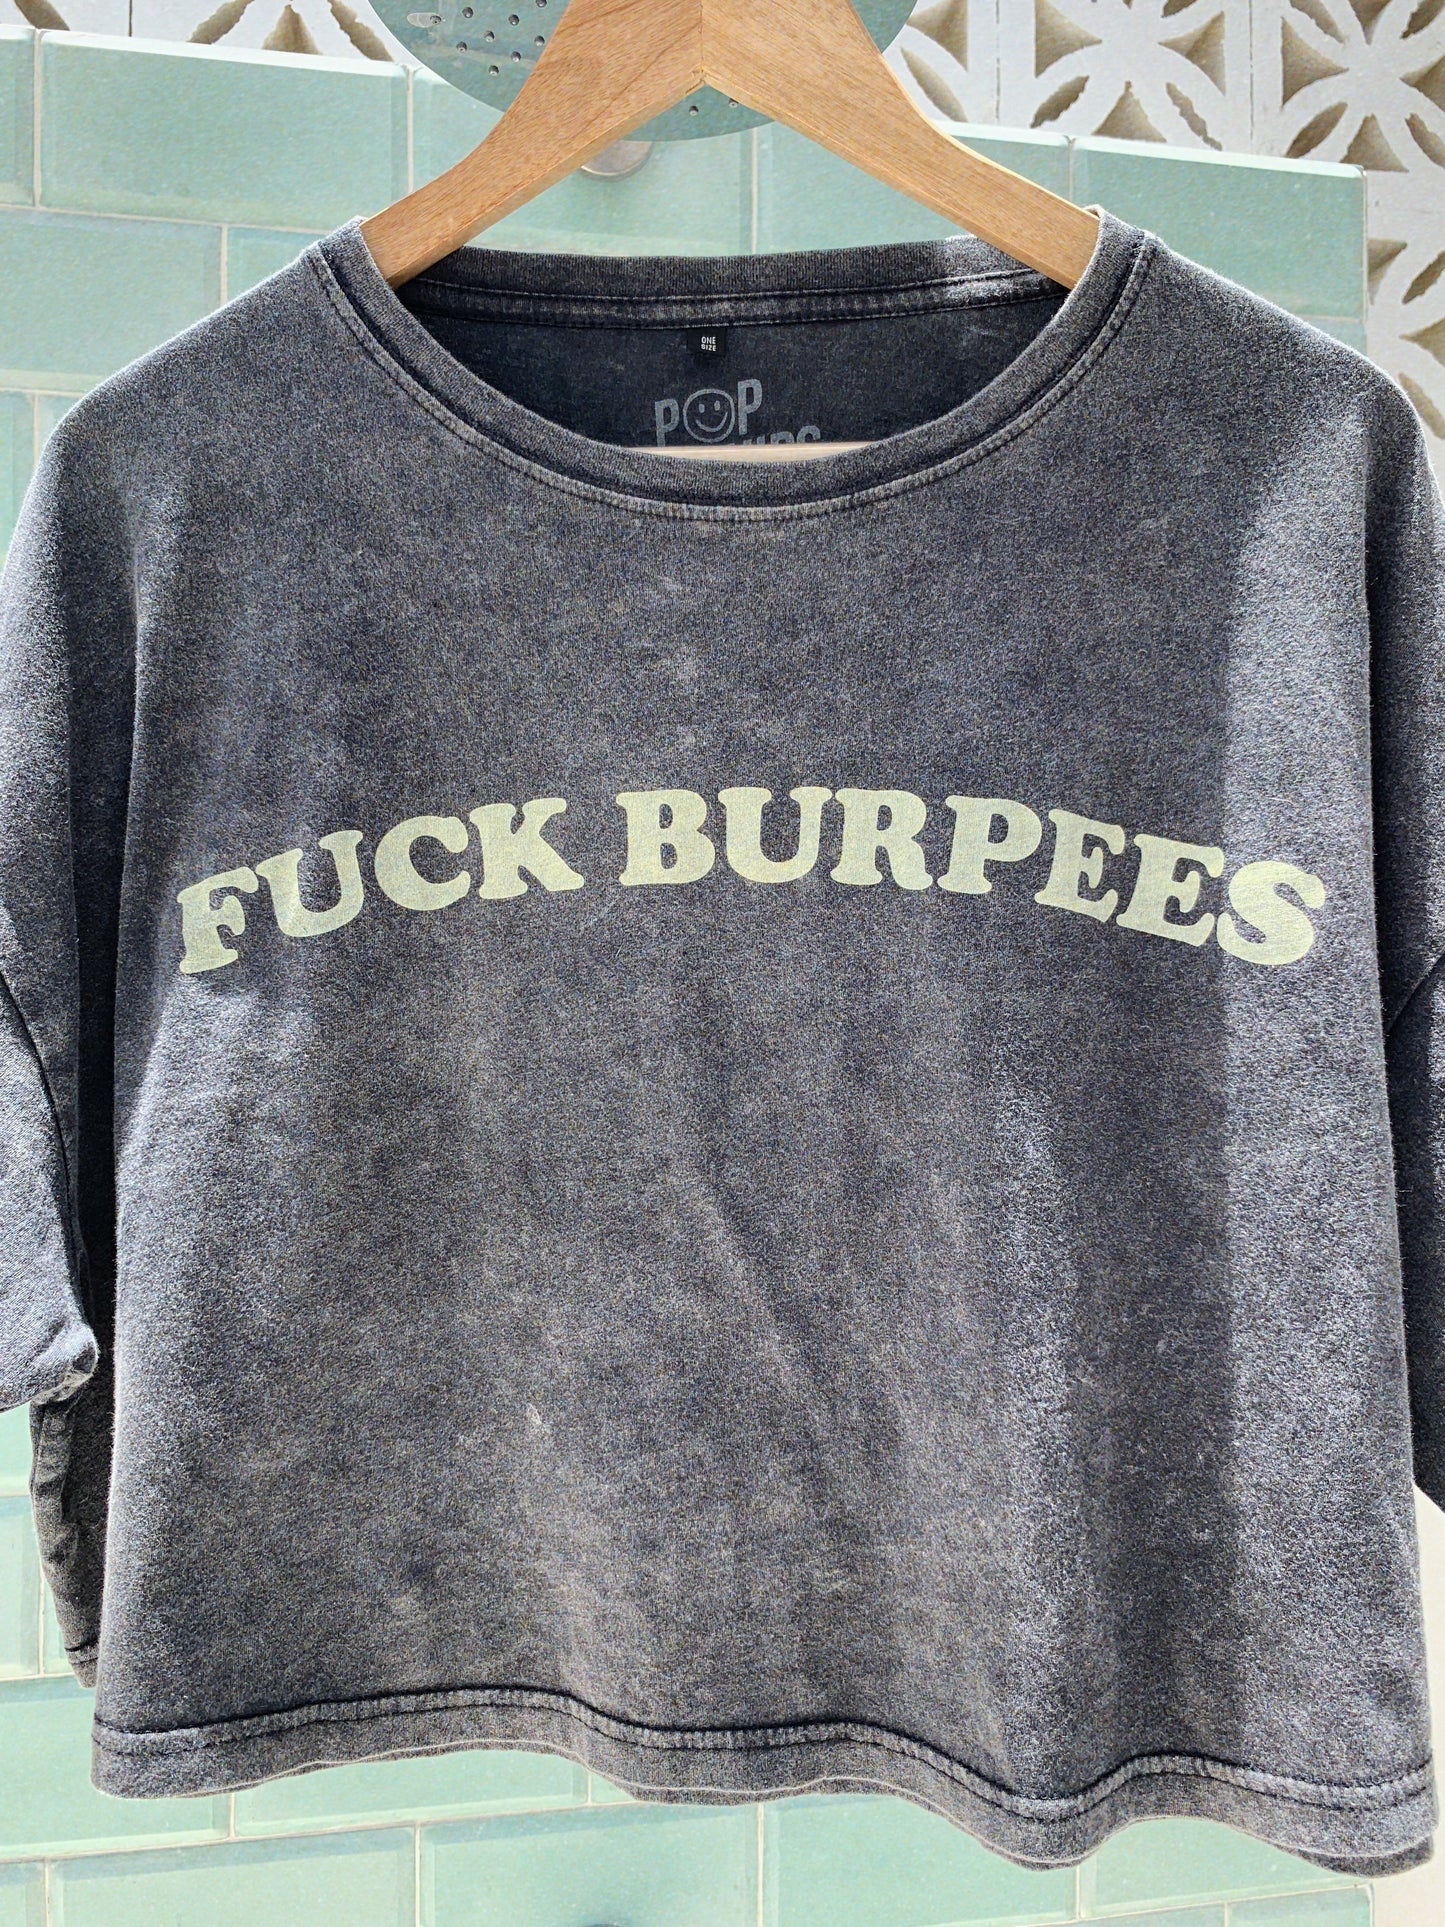 Fuck burpees oversized cropped tee